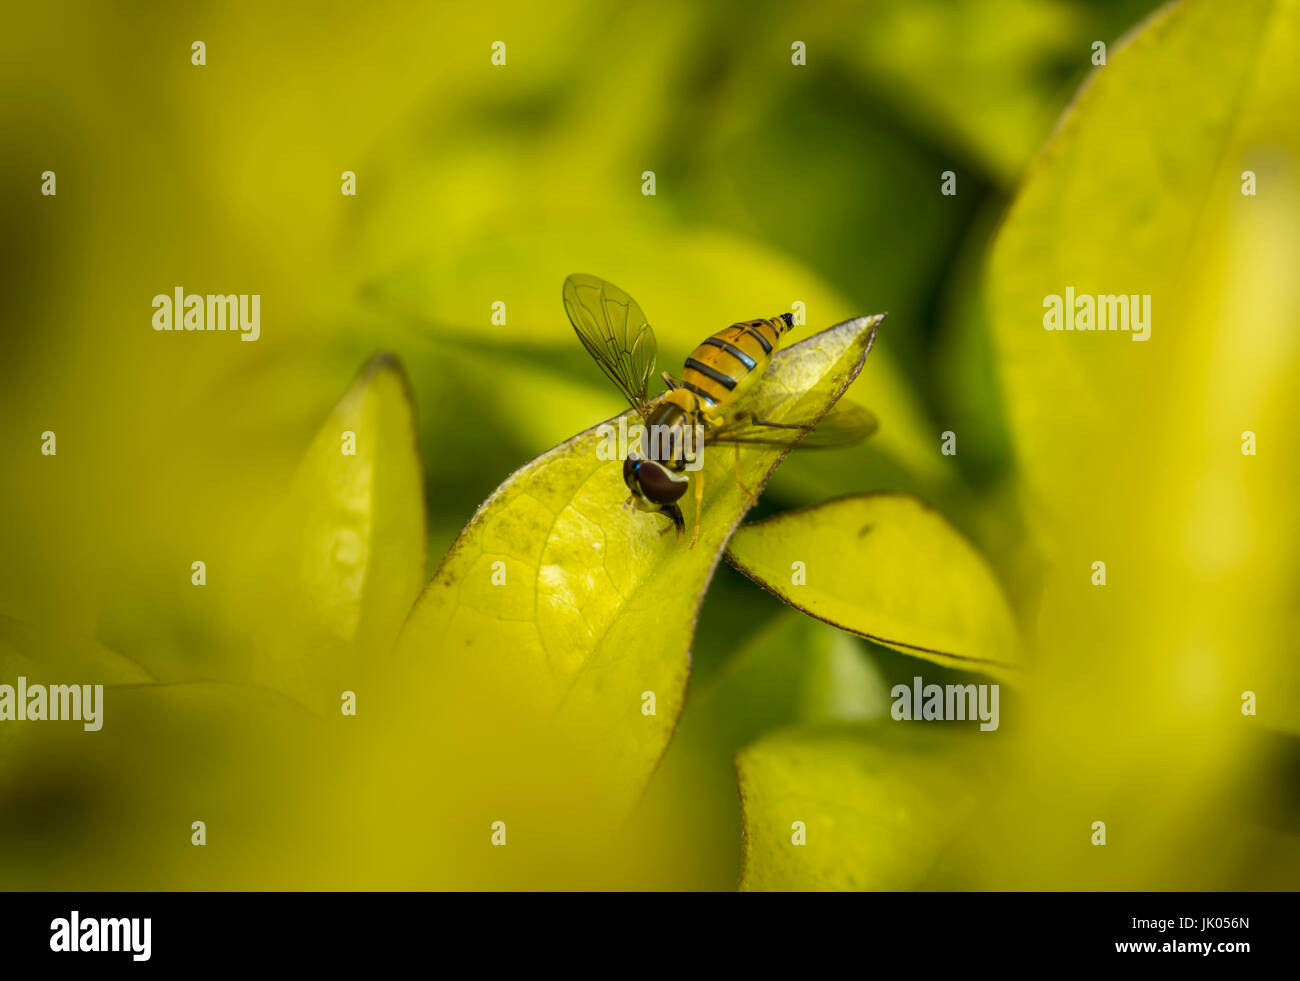 Toxomerus marginatus or flower fly on a green leaf Stock Photo